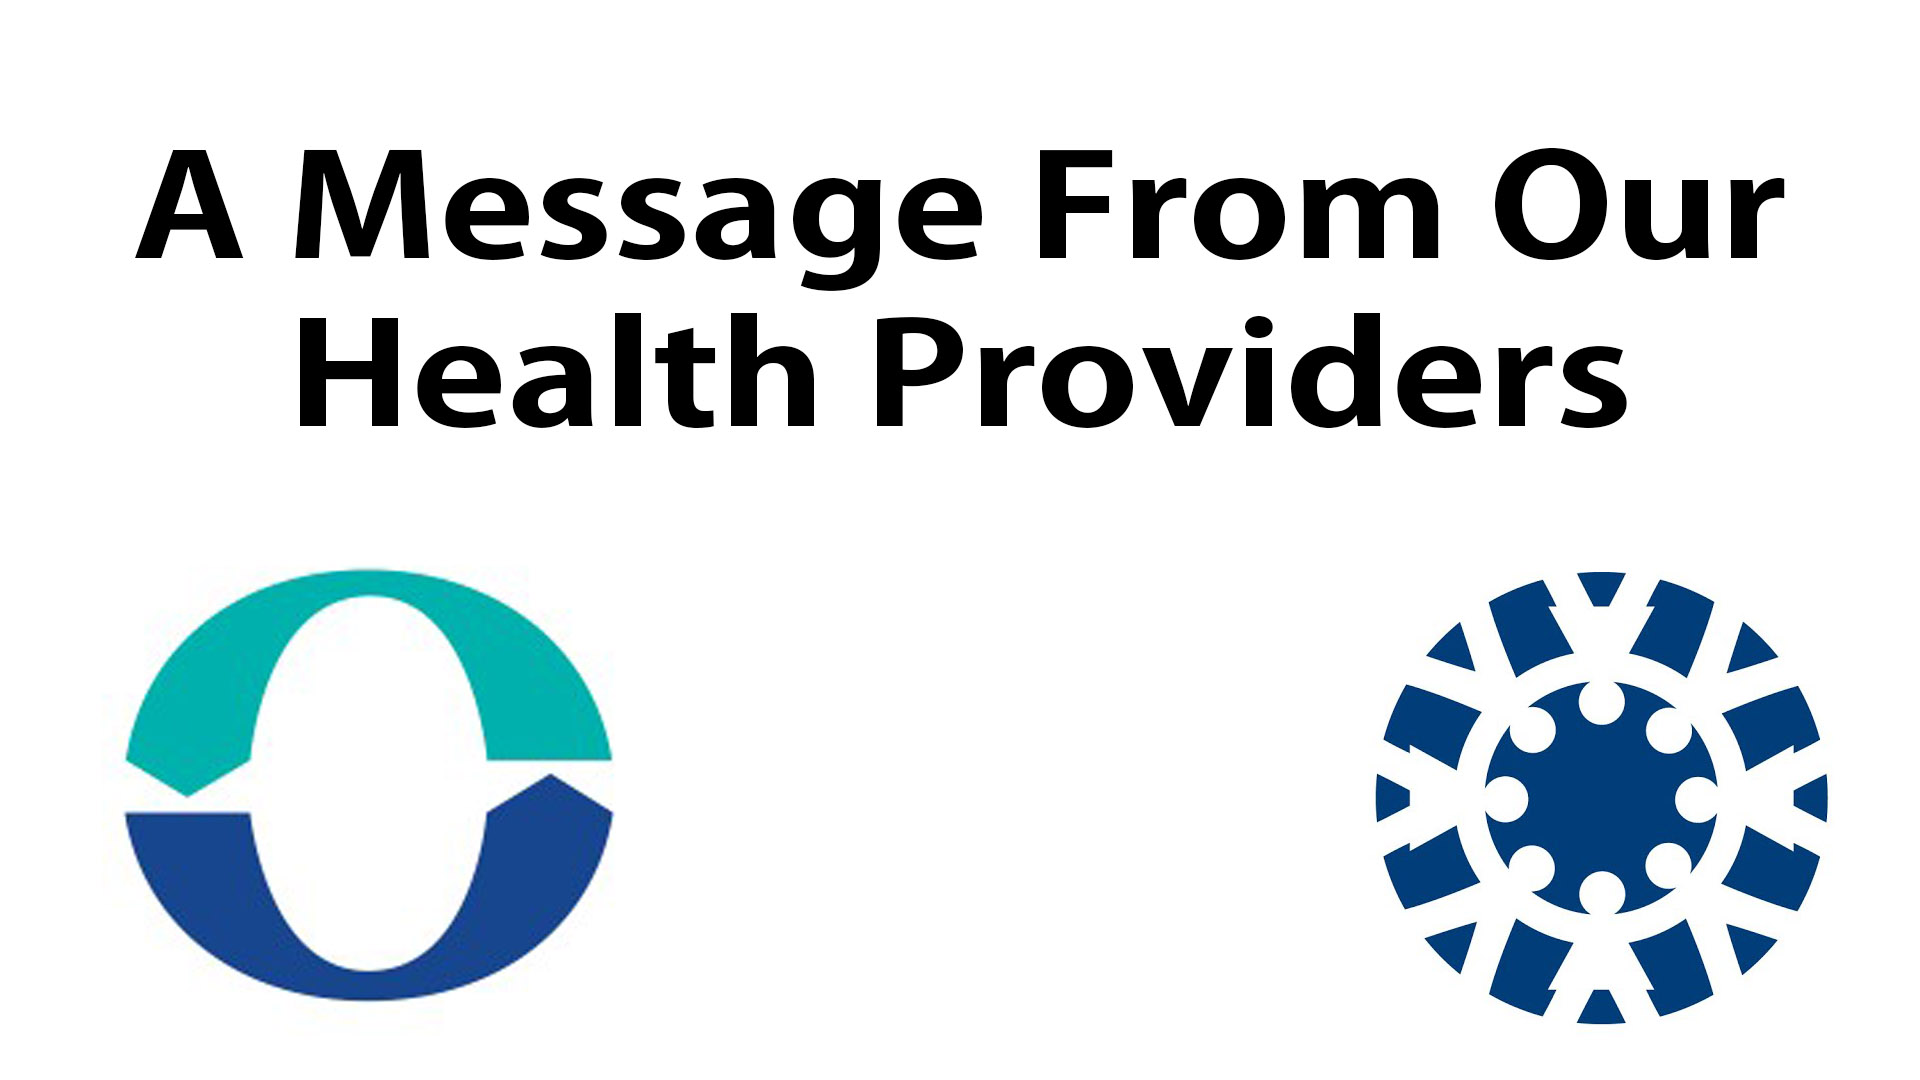 A Message from The Ohio Hospital Association